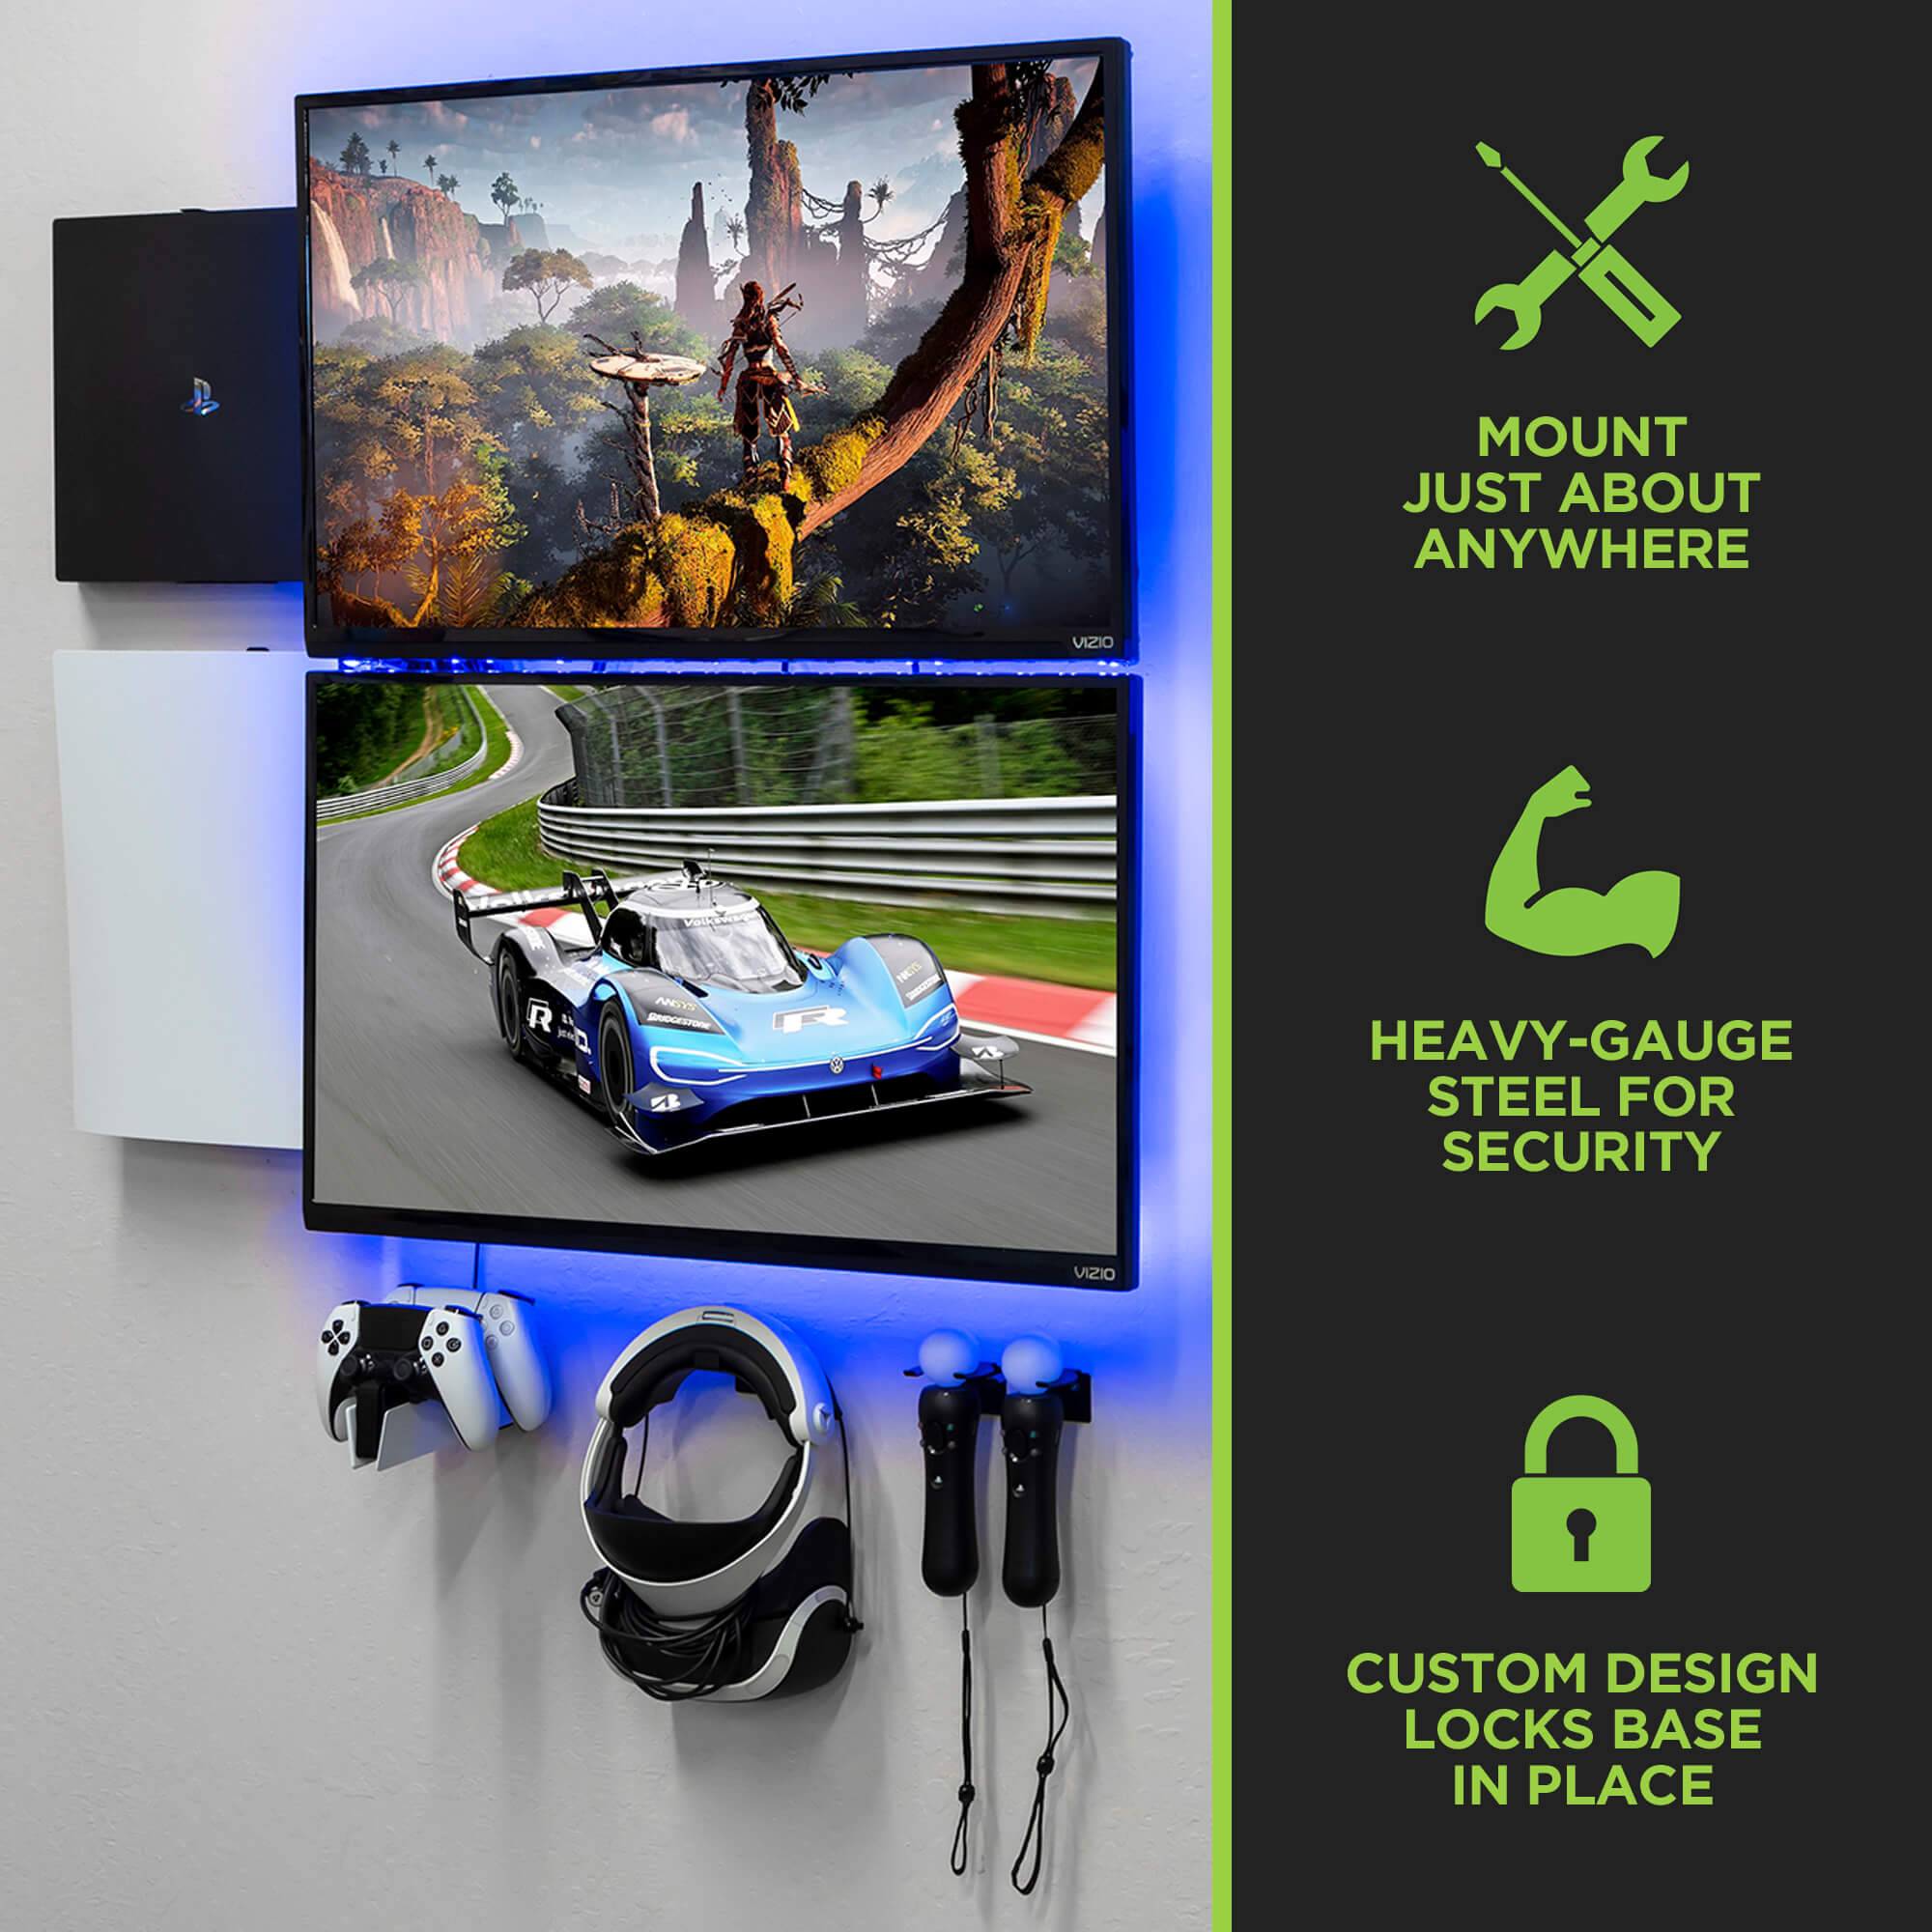 The PS5 DualSense charging station is wall mounted in a HIDEit Mount under a TV for easy gaming access.